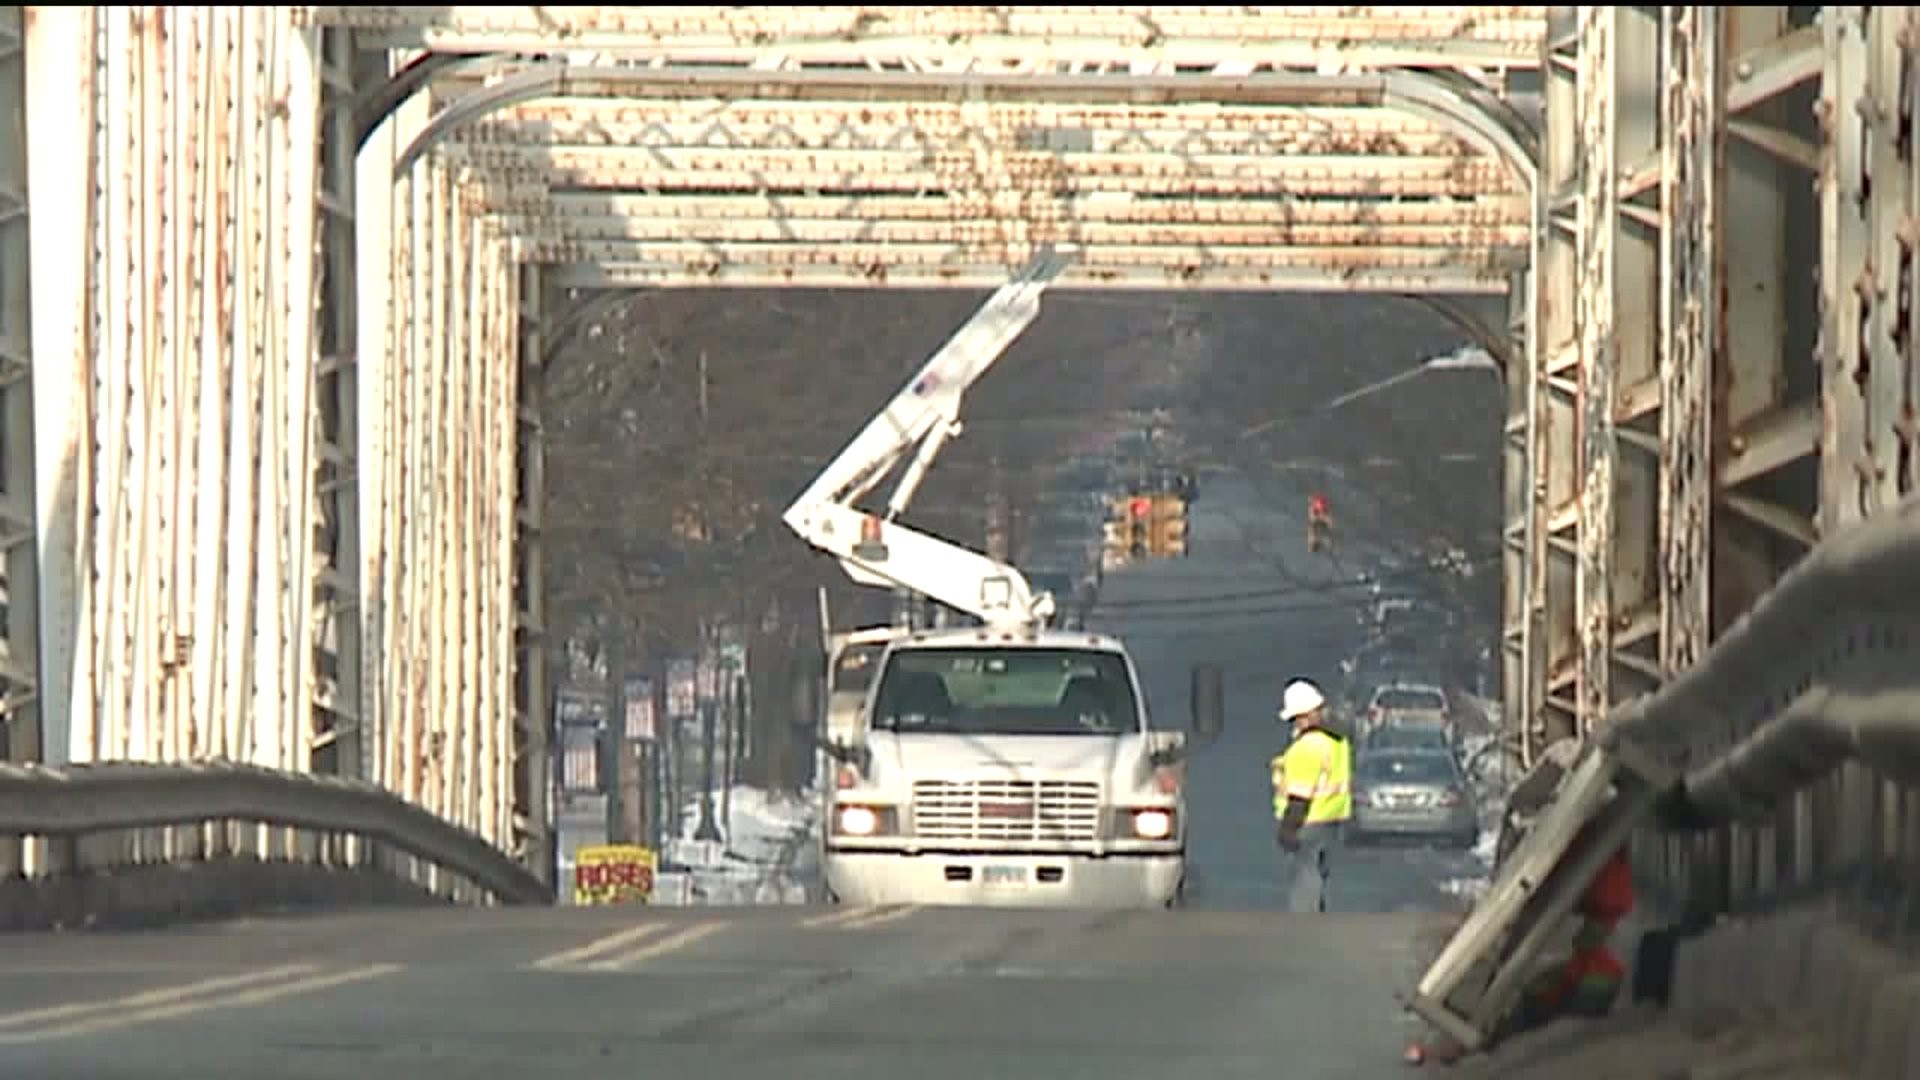 Bridge Closed for Inspection in Luzerne County